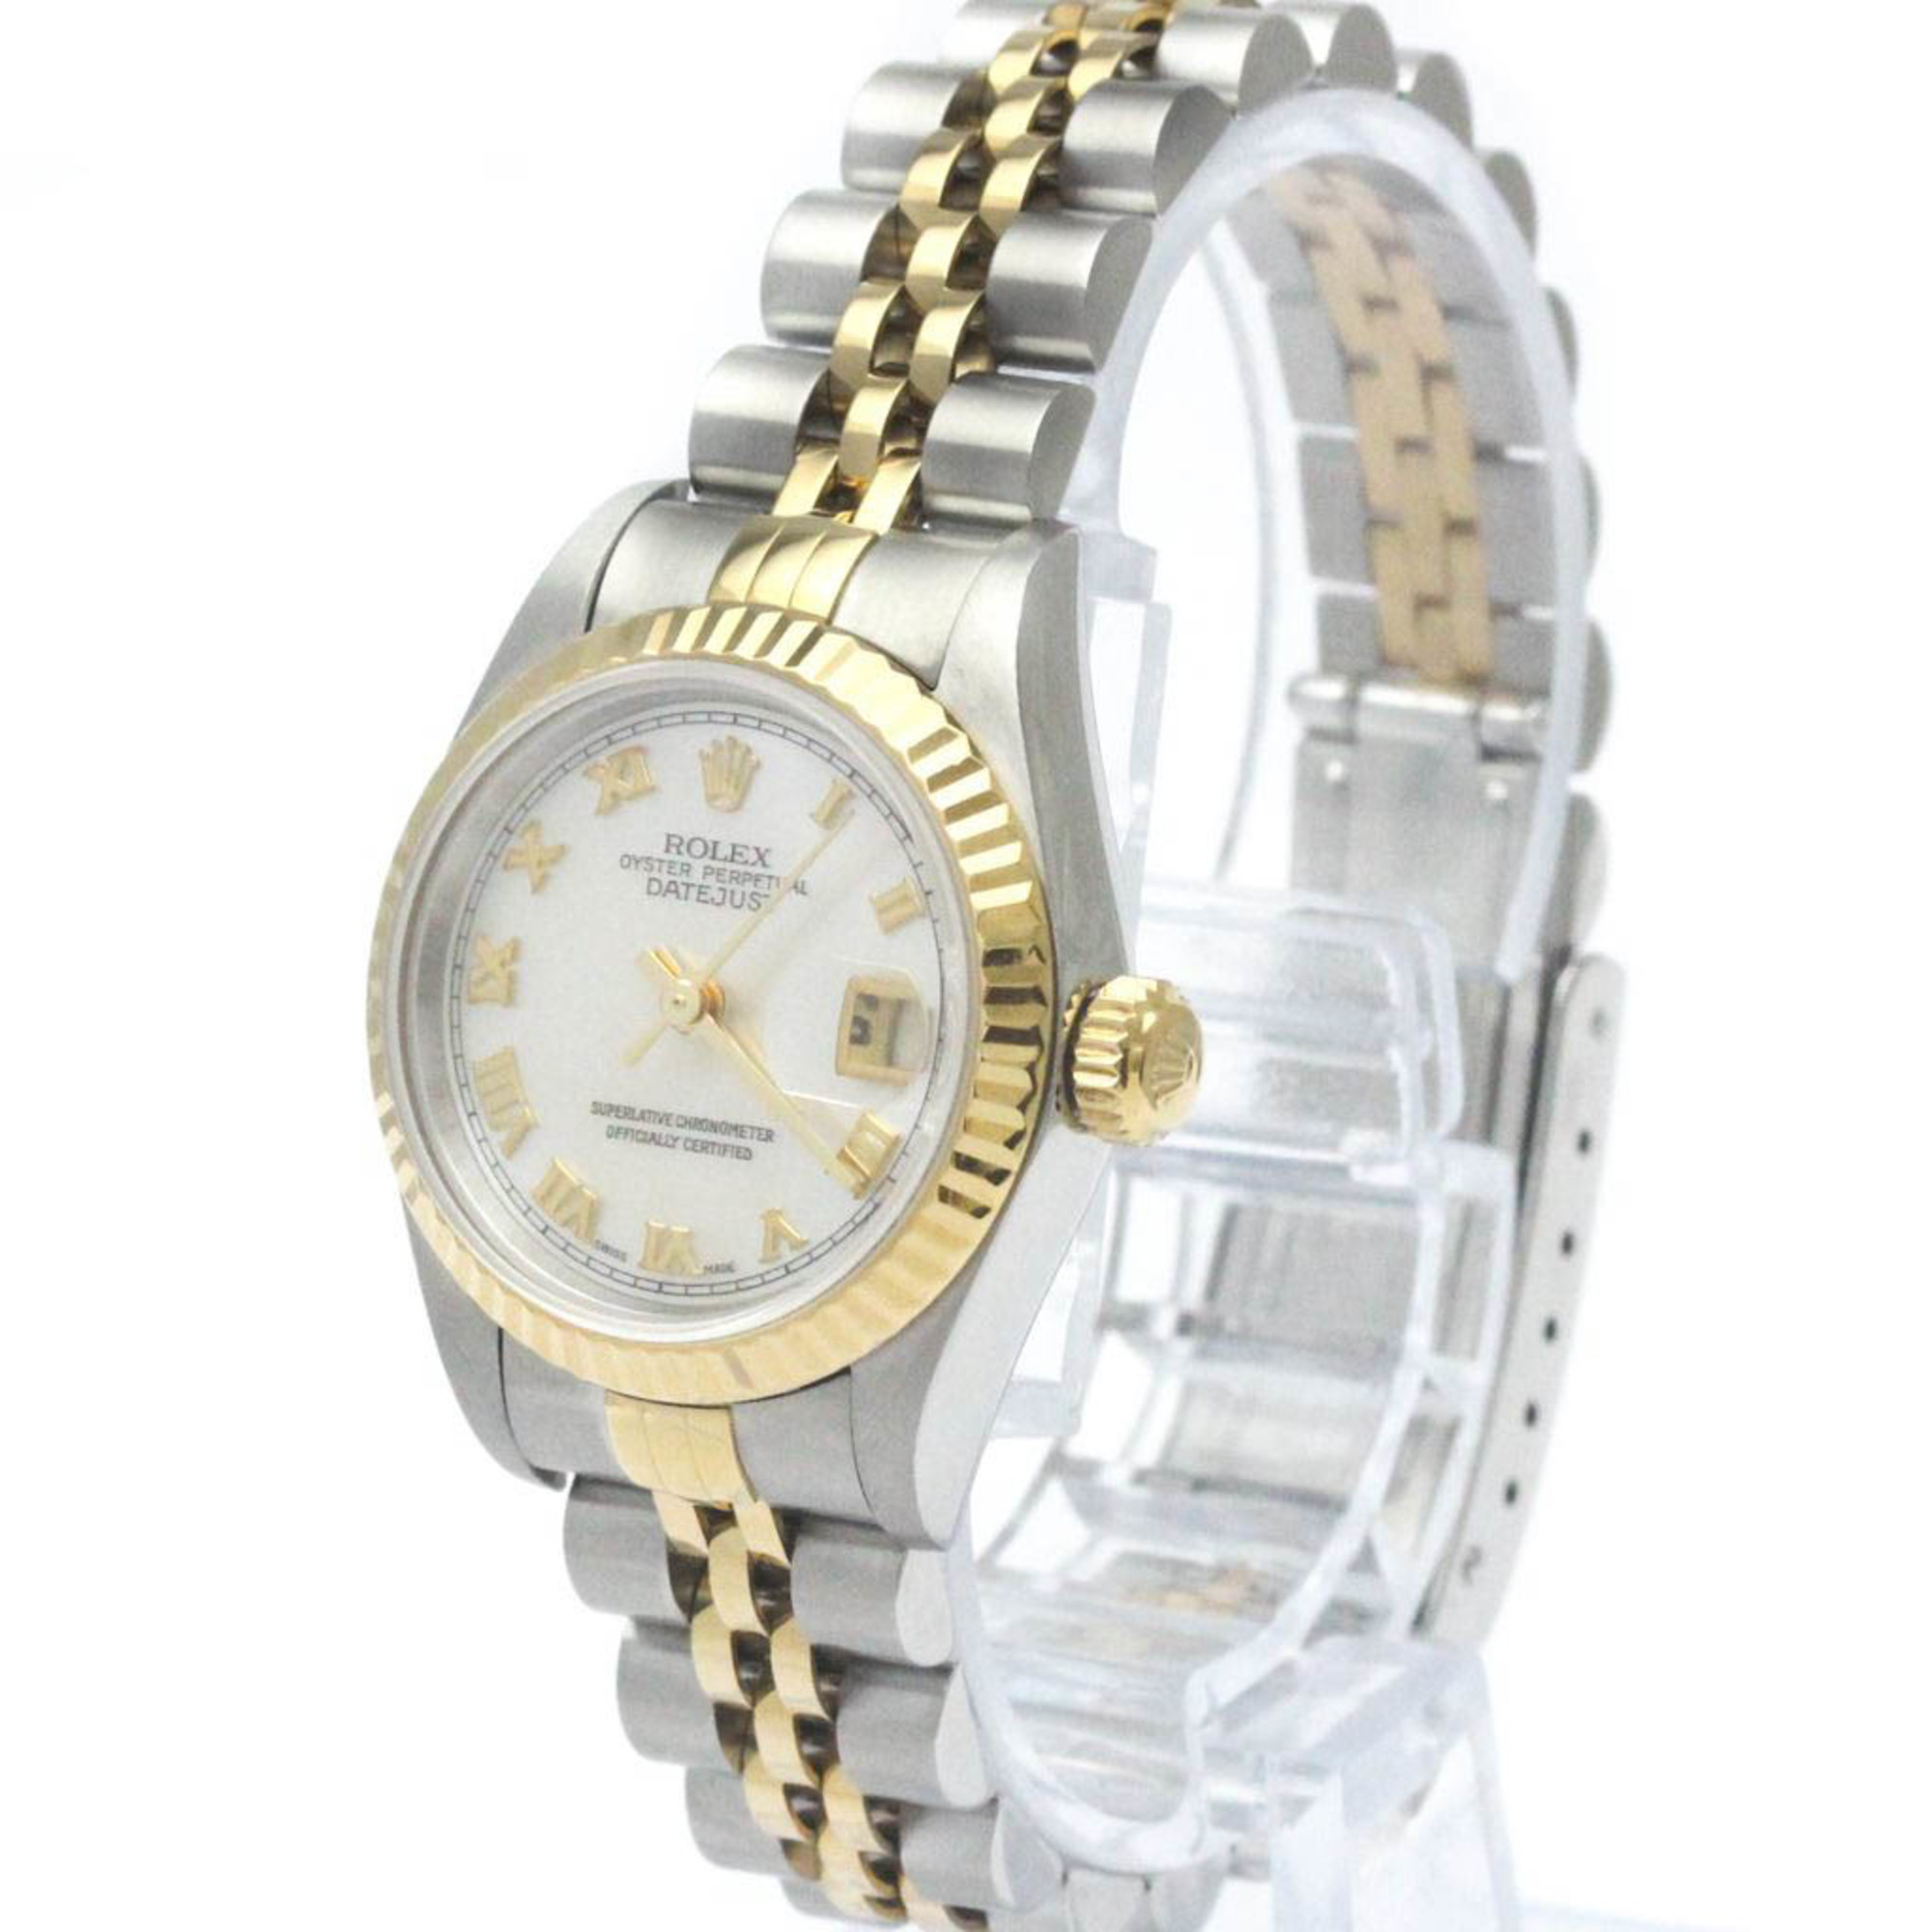 Rolex Datejust Automatic Stainless Steel,Yellow Gold (18K) Women's Dress/Formal 69173